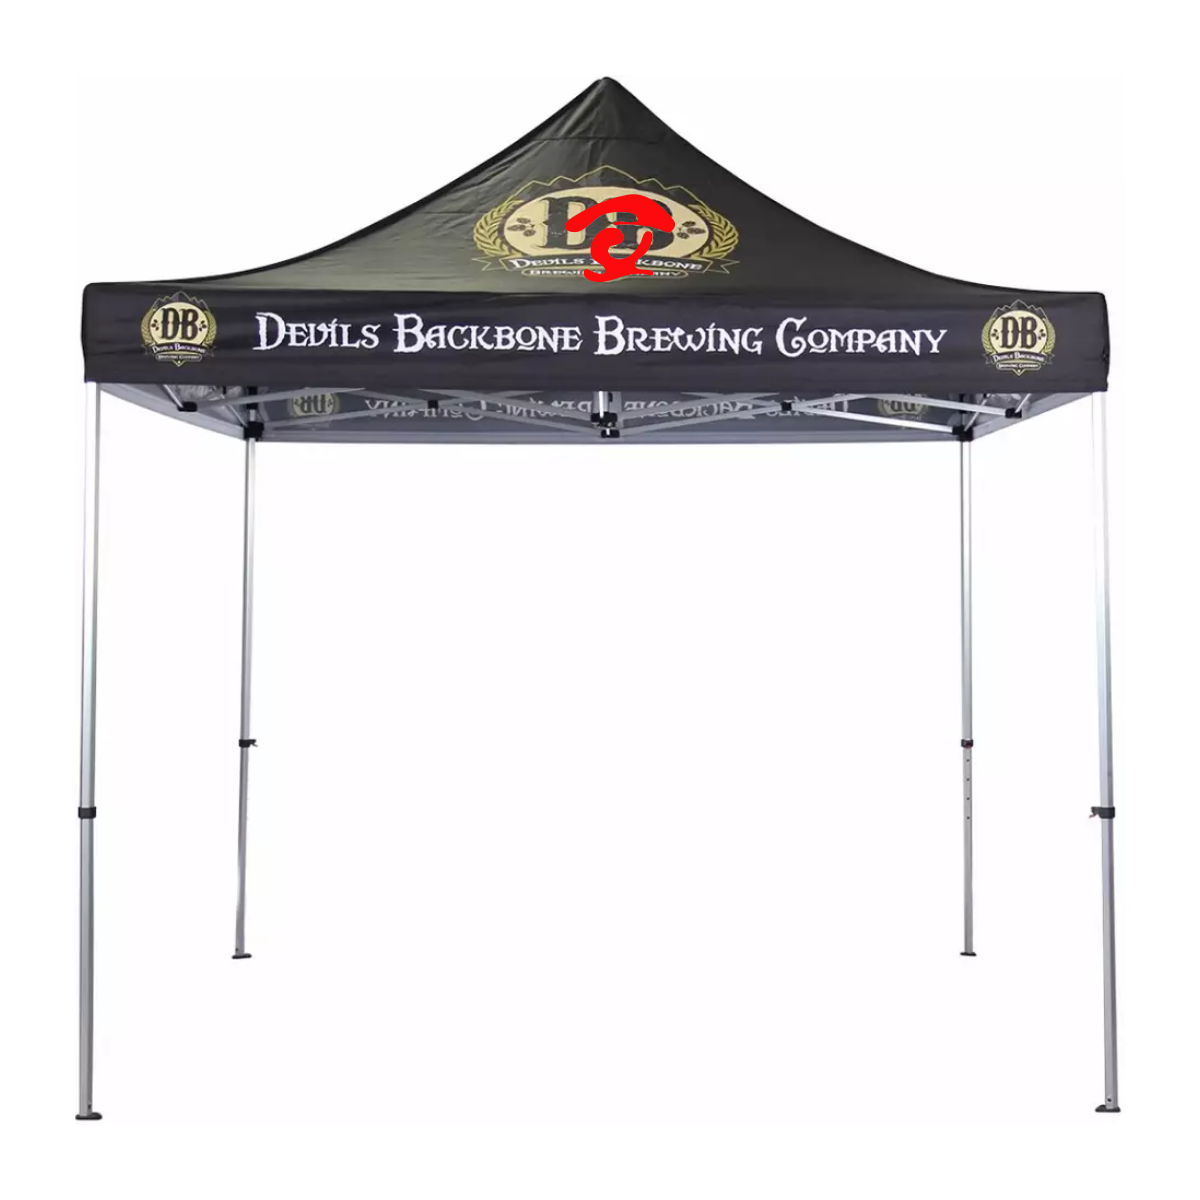 High Quality Dye Sublimation Printing Marquee Tent 3X3m, 3X6m, 10X10ft, 10X20ft Aluminum Fold Tent with PU Oxford Gazebo Canopy for Outdoor Events